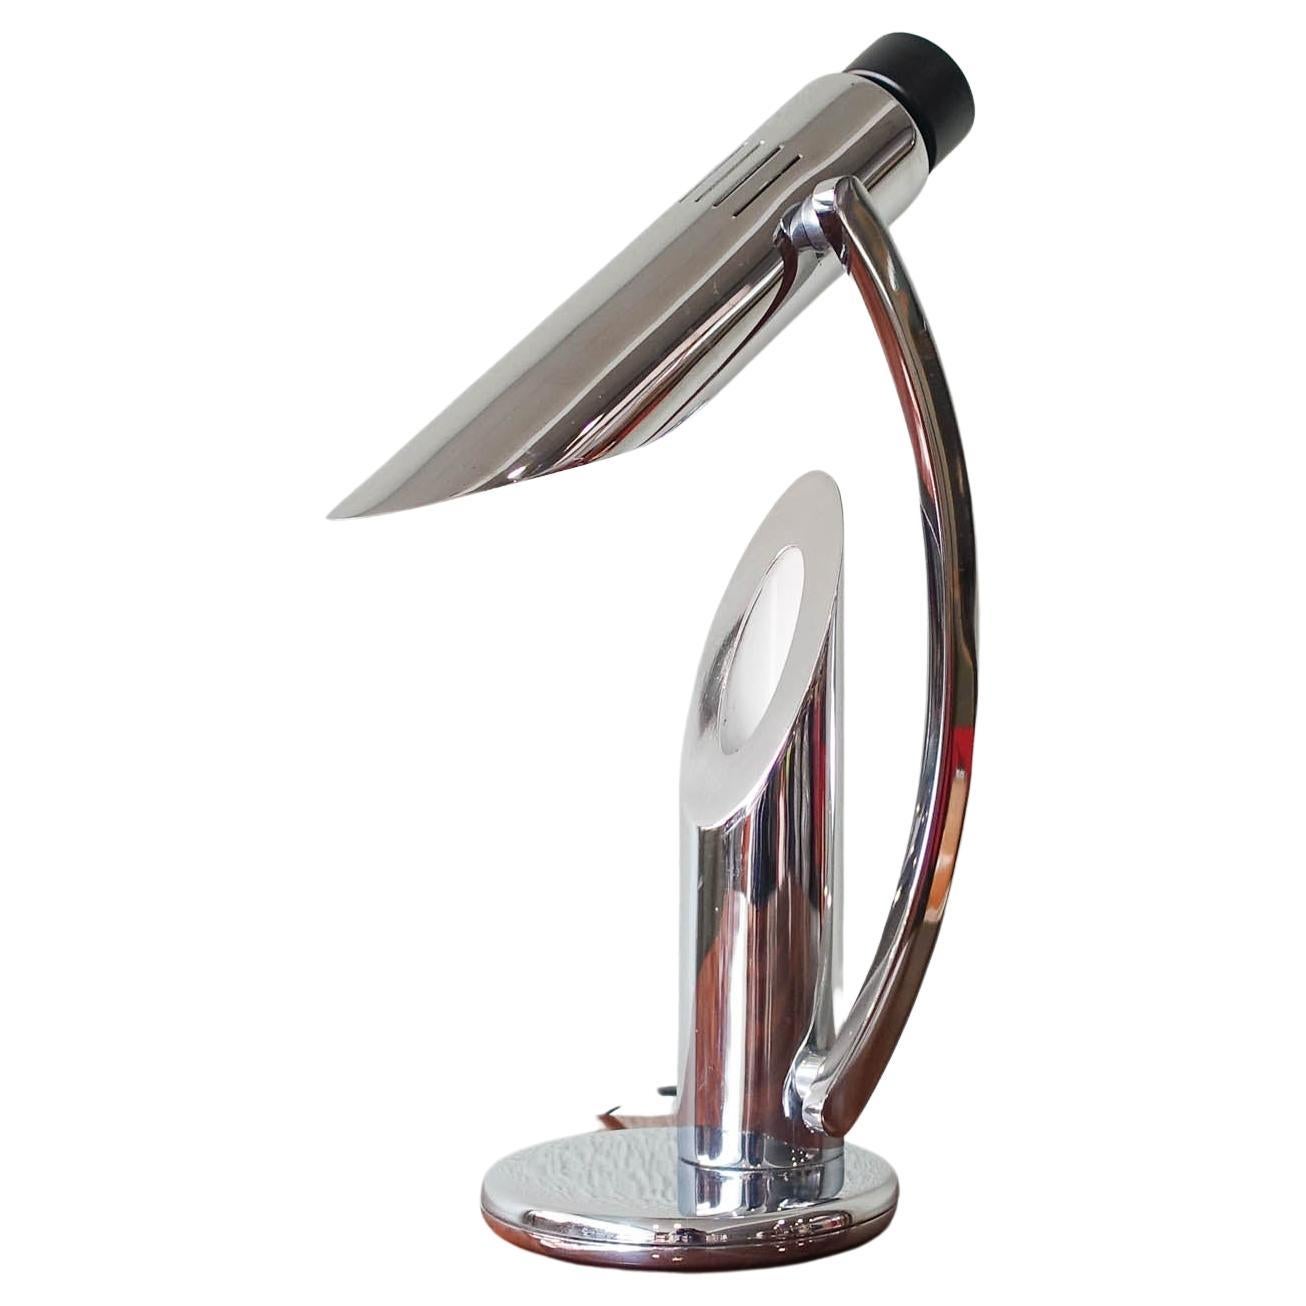 Tharsis Foldable Chrome Table Lamp from Fase by Luis Perez de la Oliva, 1973